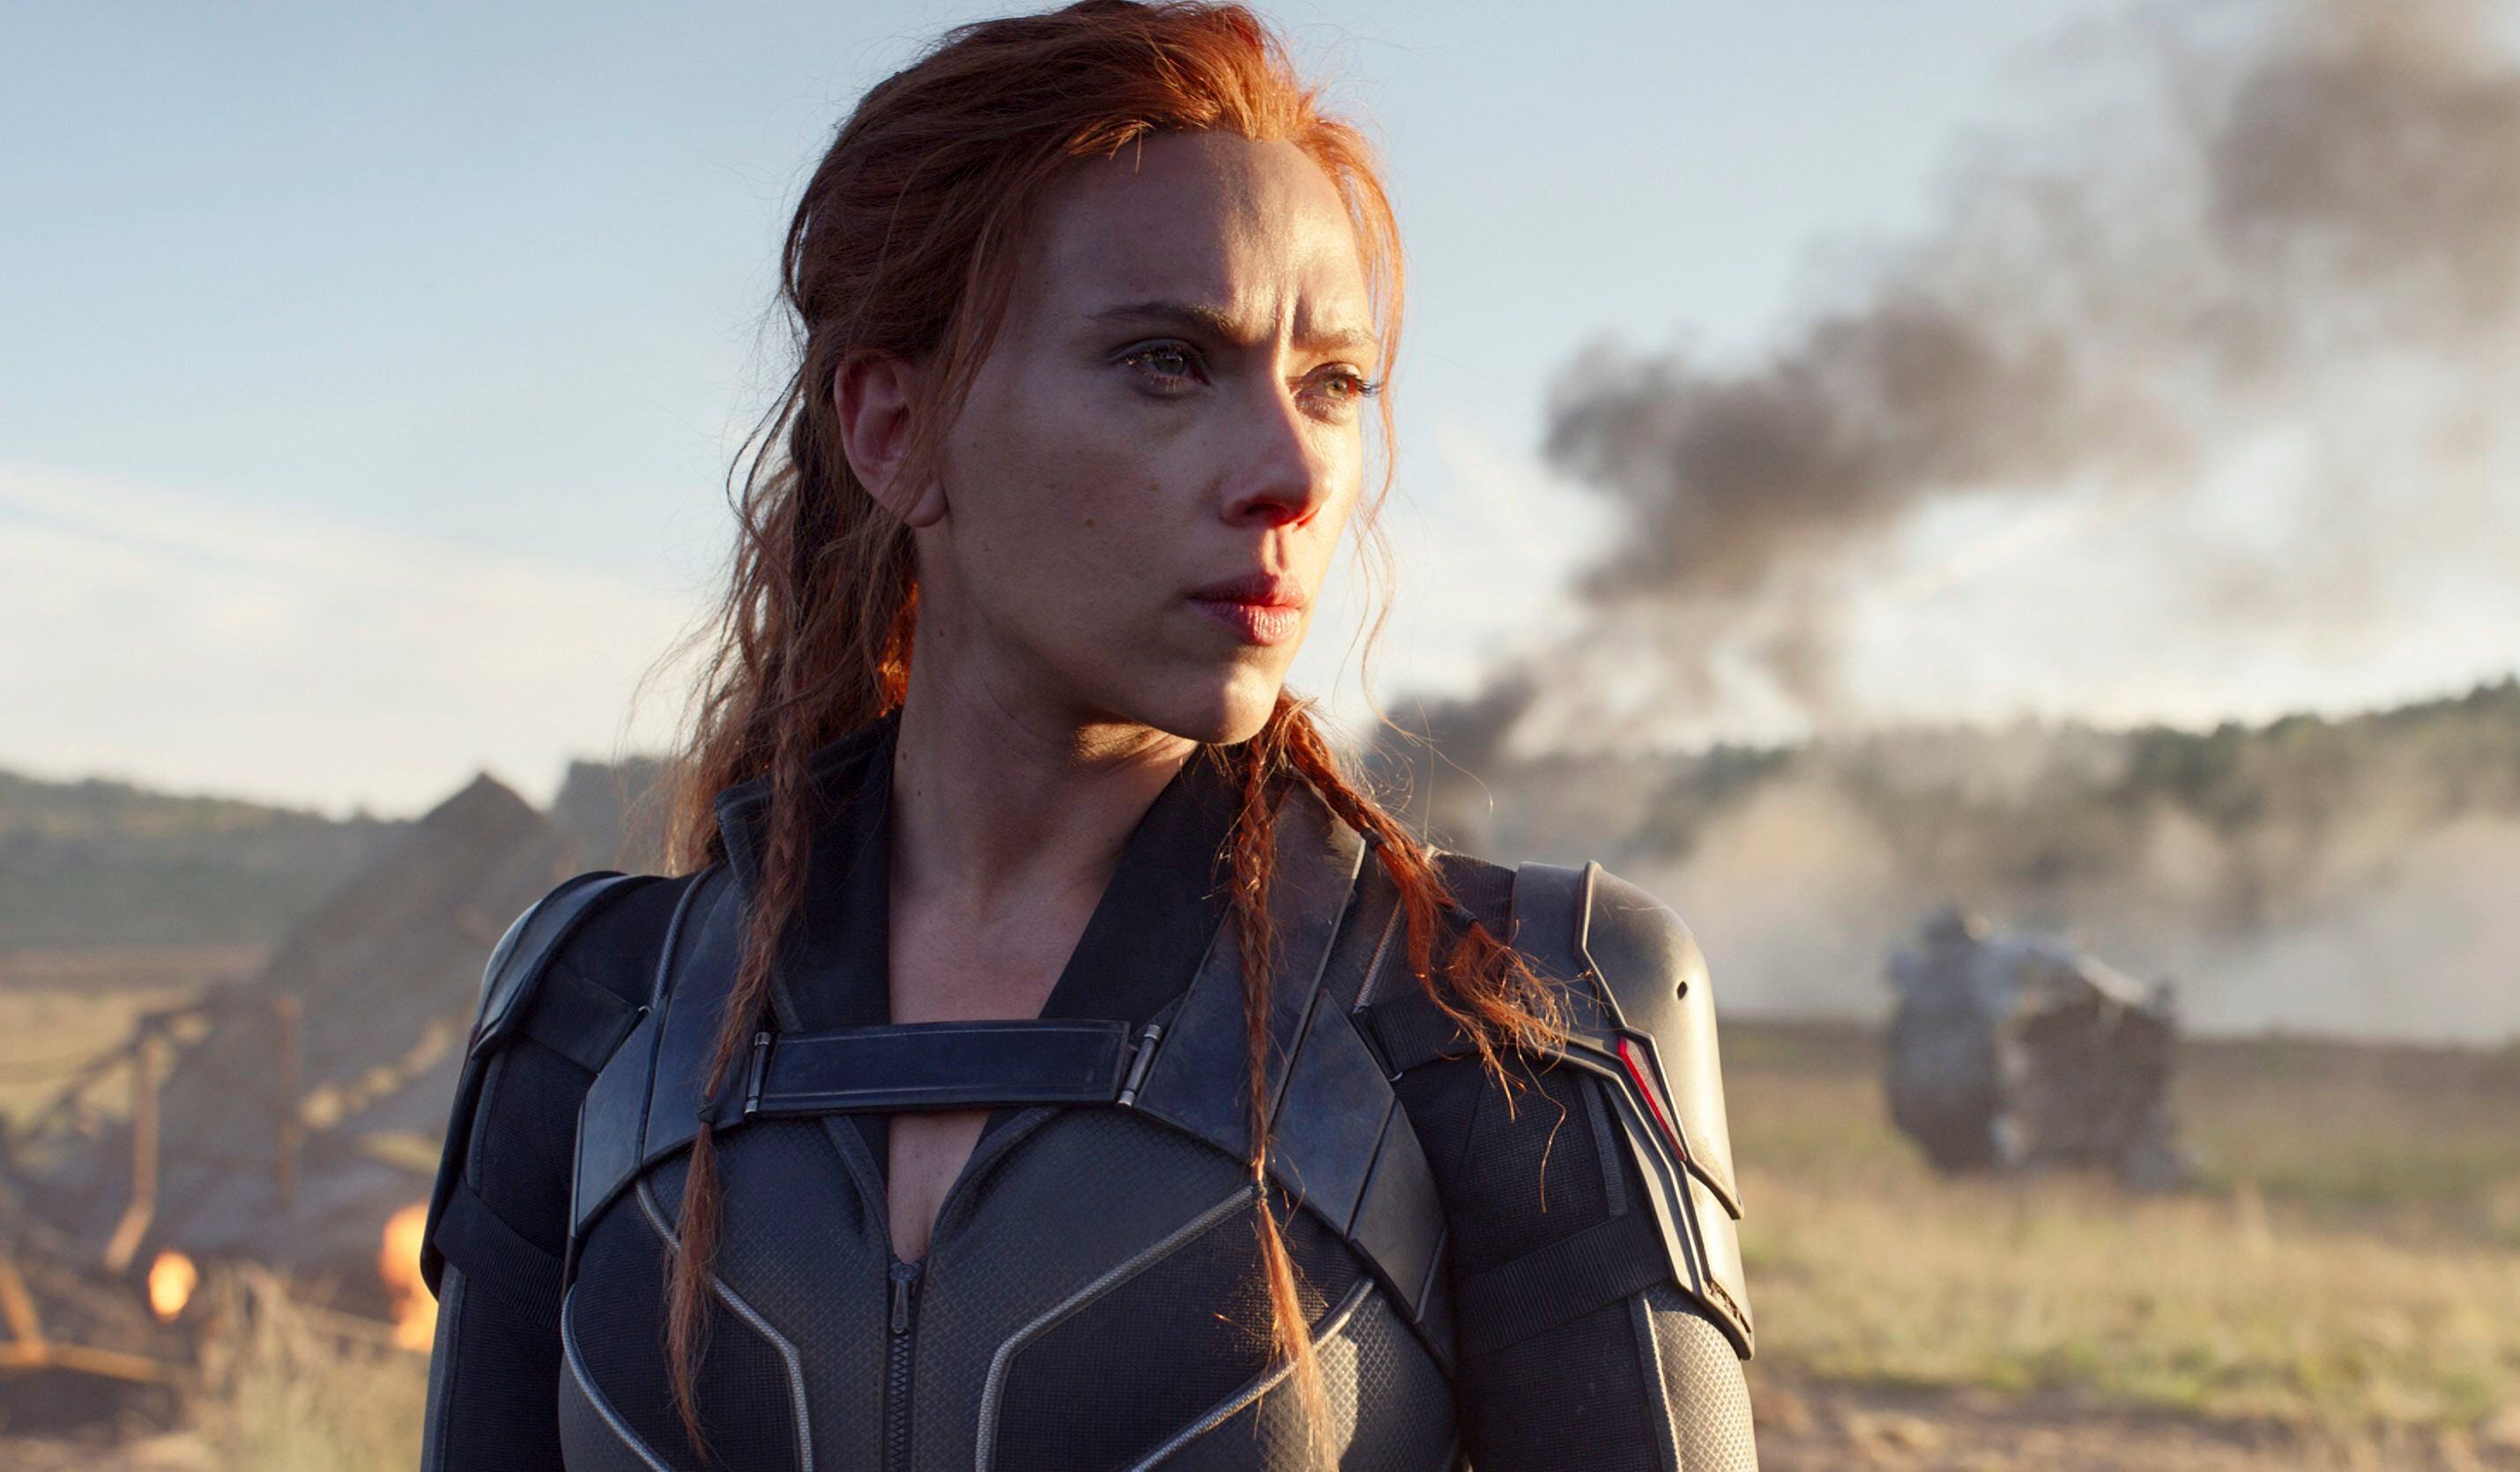 Disney shifts ‘Black Widow’ and doubles down on steaming